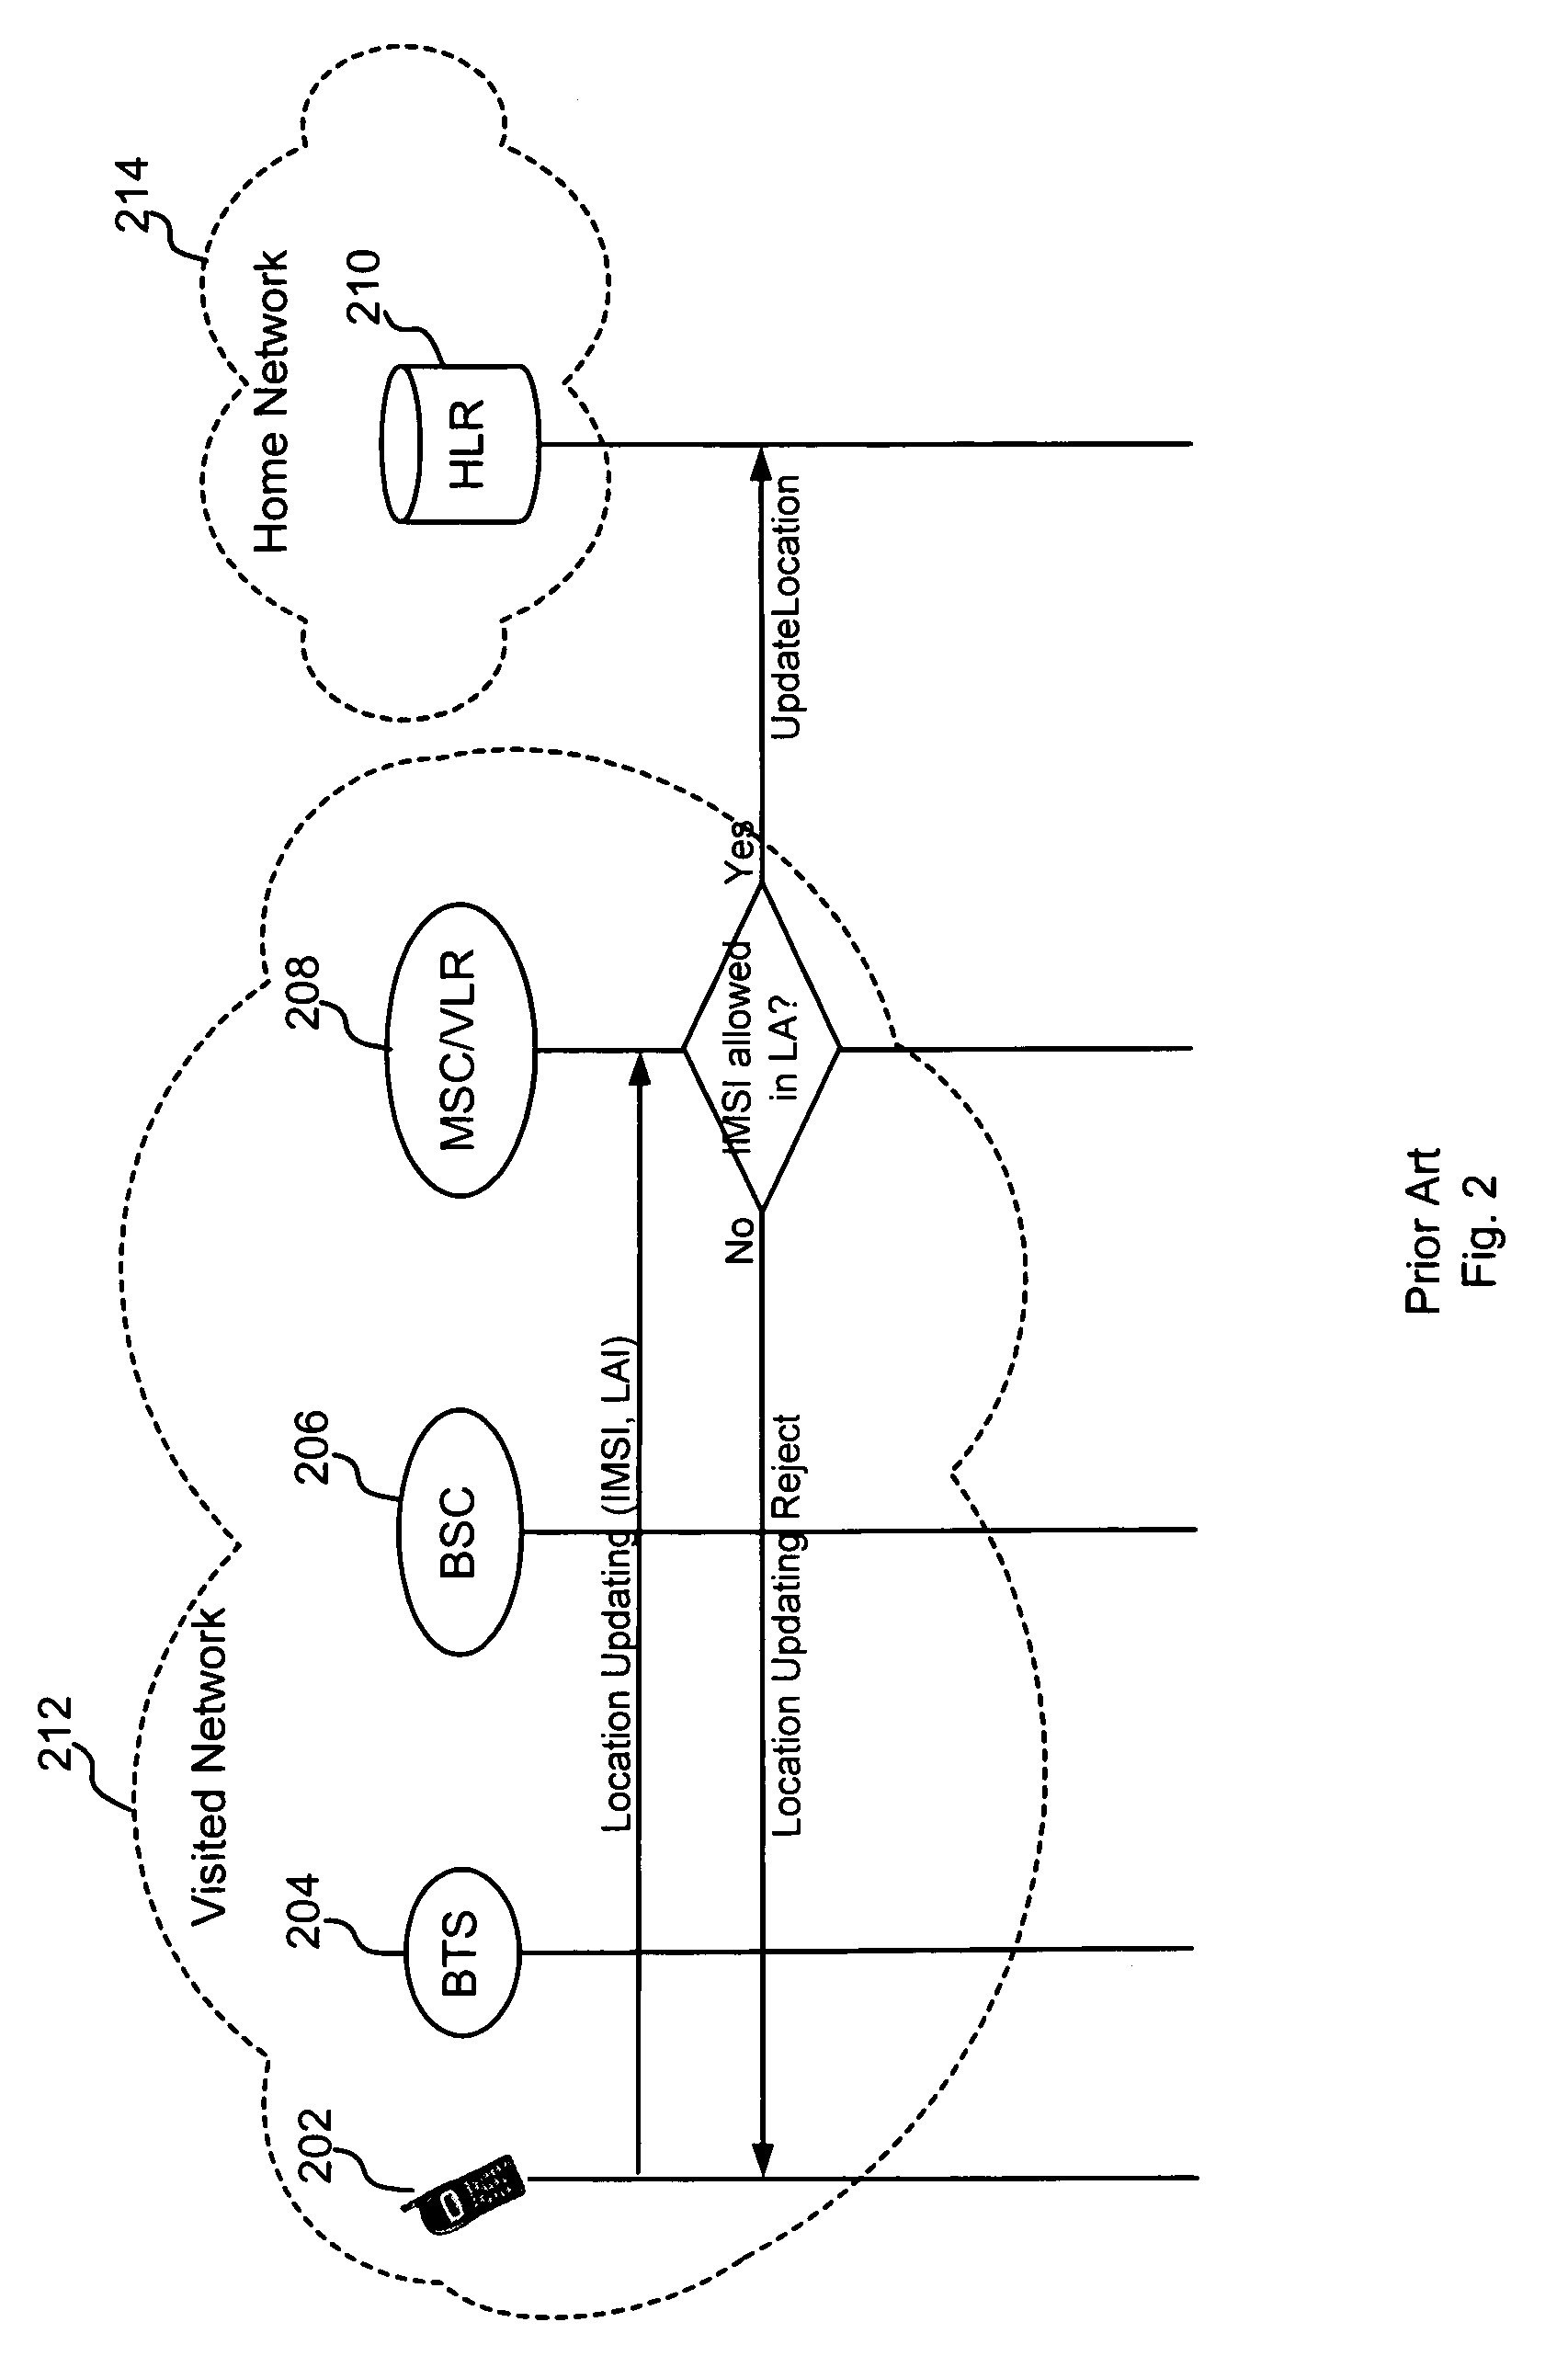 System and method for controlling domestic roaming